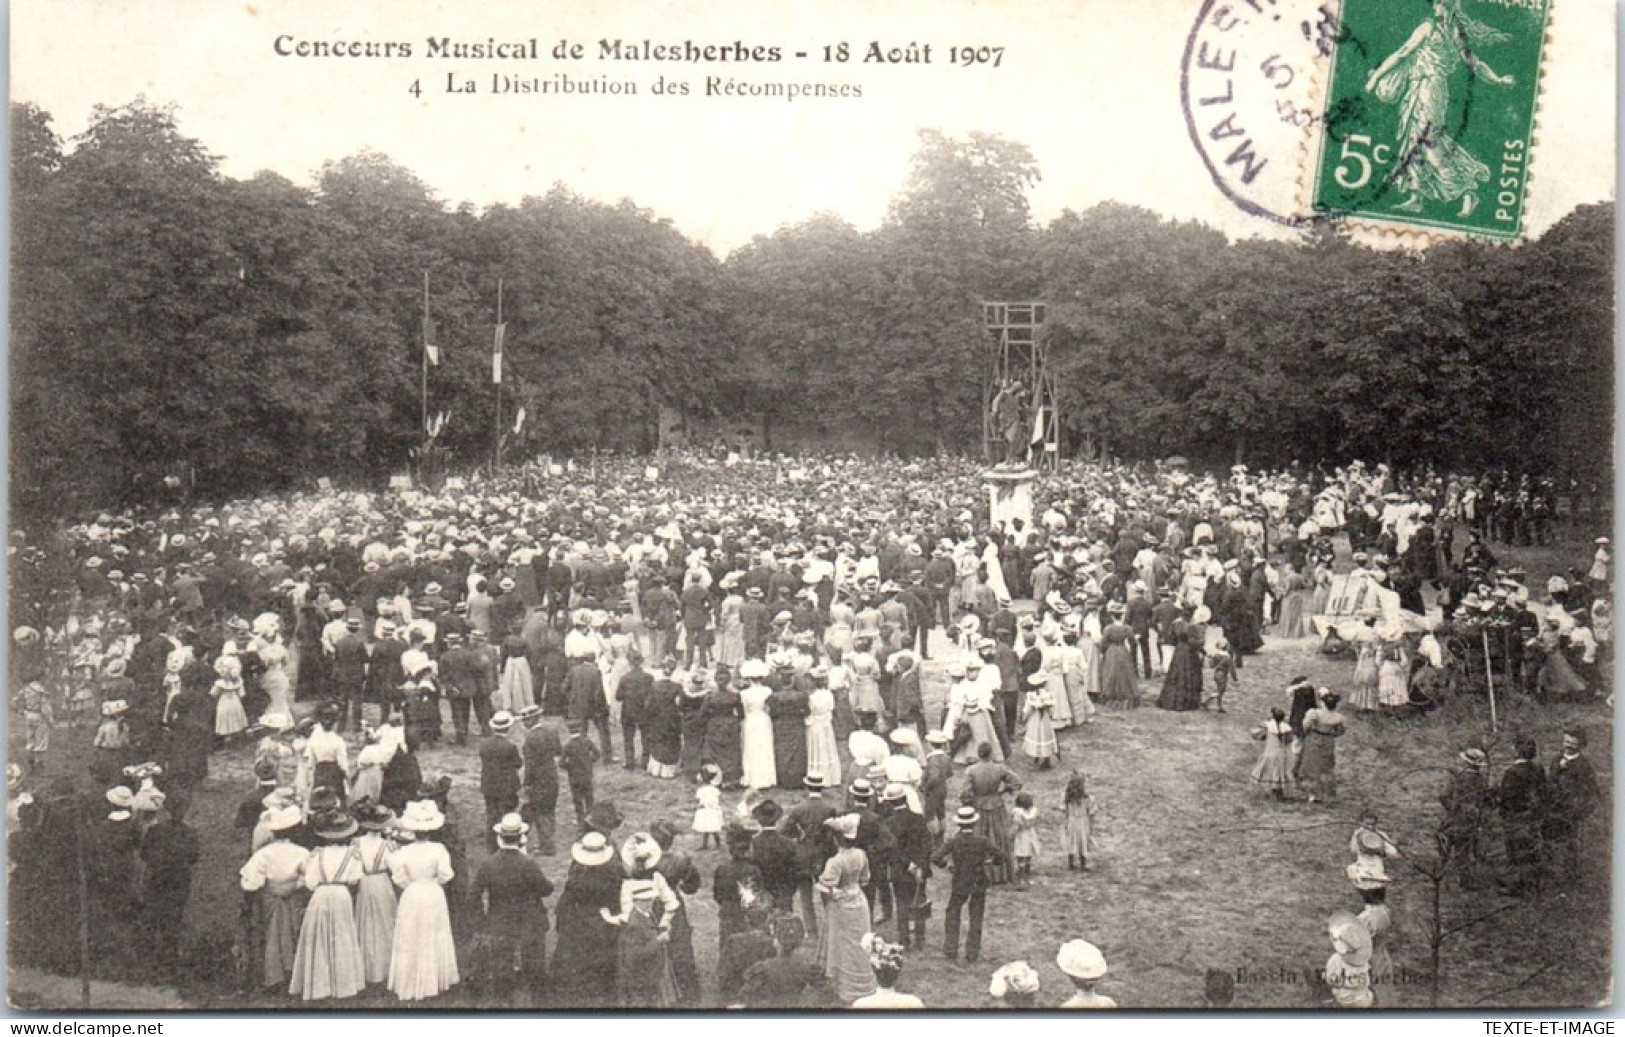 45 MALESHERBES - Concours Musical 1907, Les Recompenses  - Malesherbes